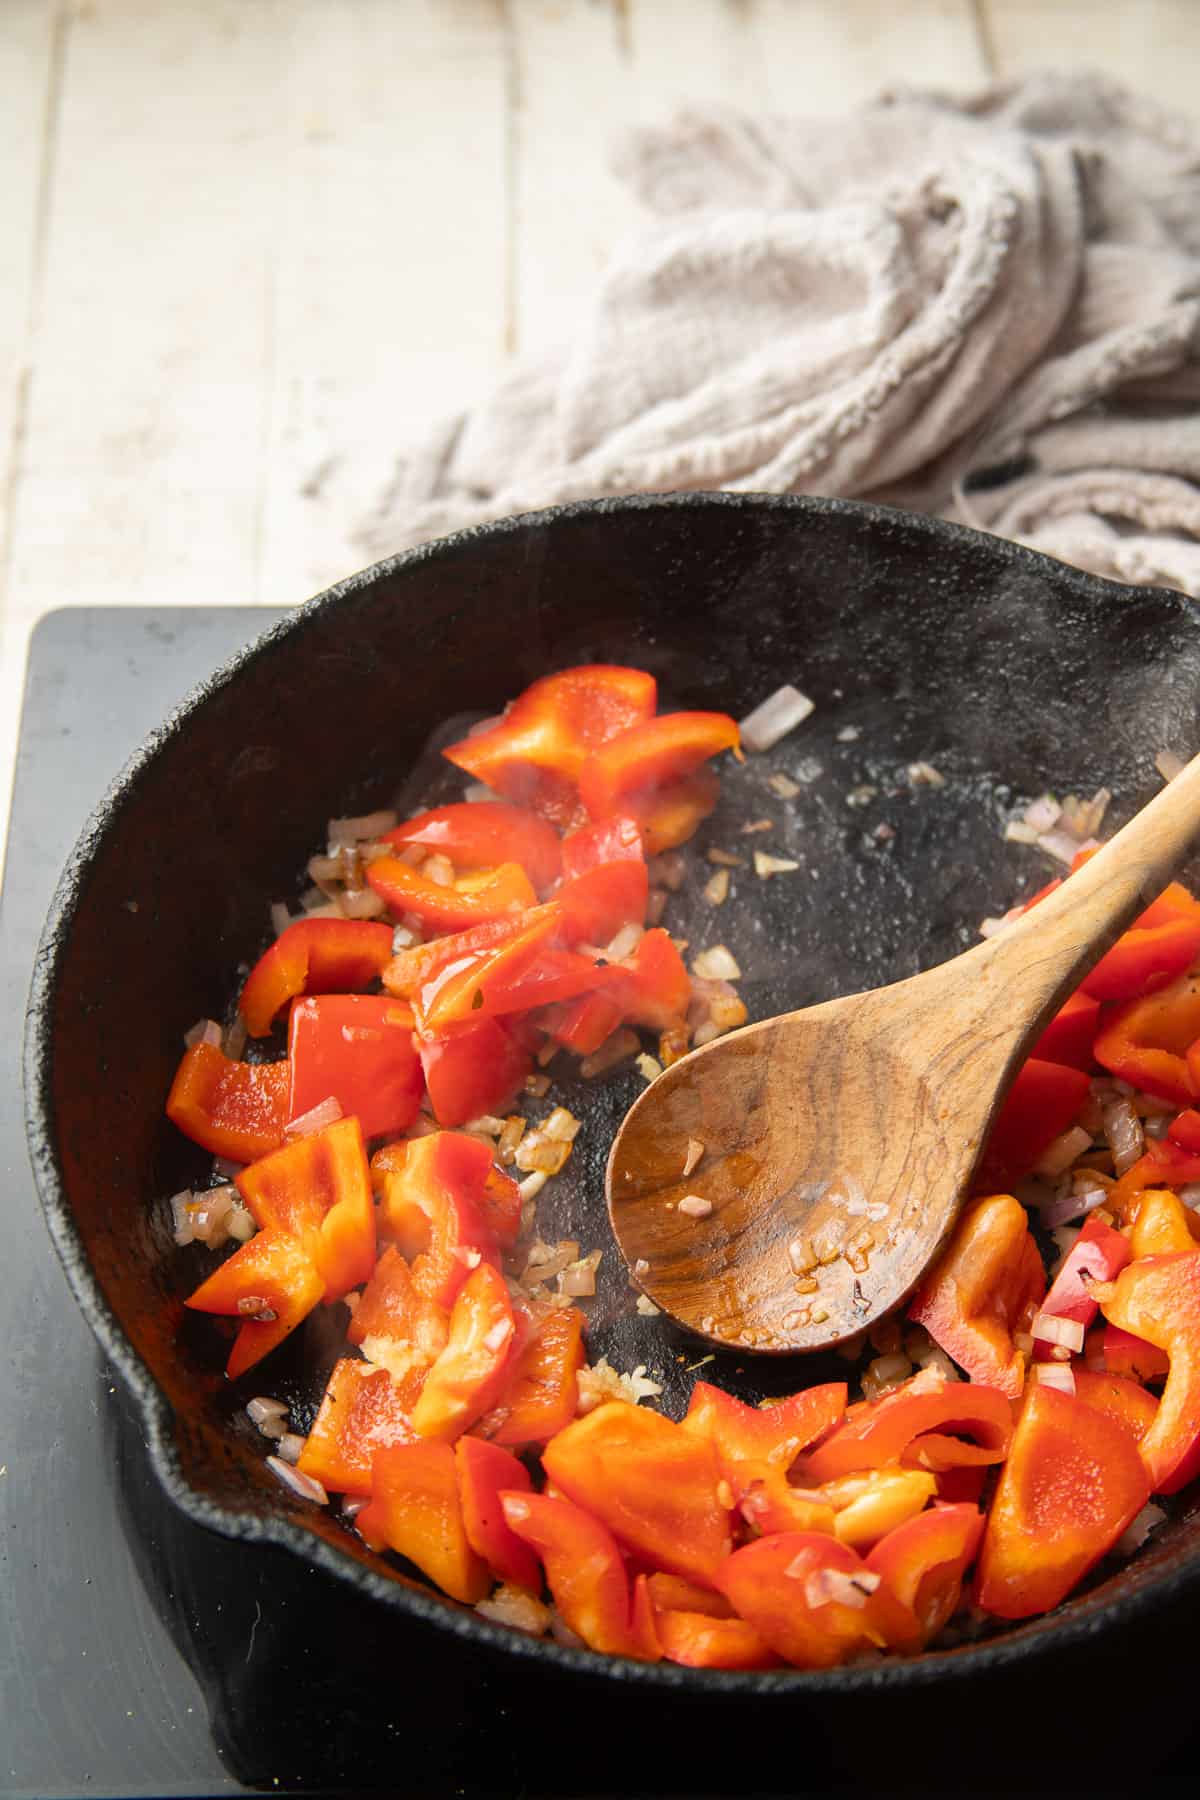 Chopped red peppers, shallots, garlic and balsamic reduction cooking in a skillet with wooden spoon.